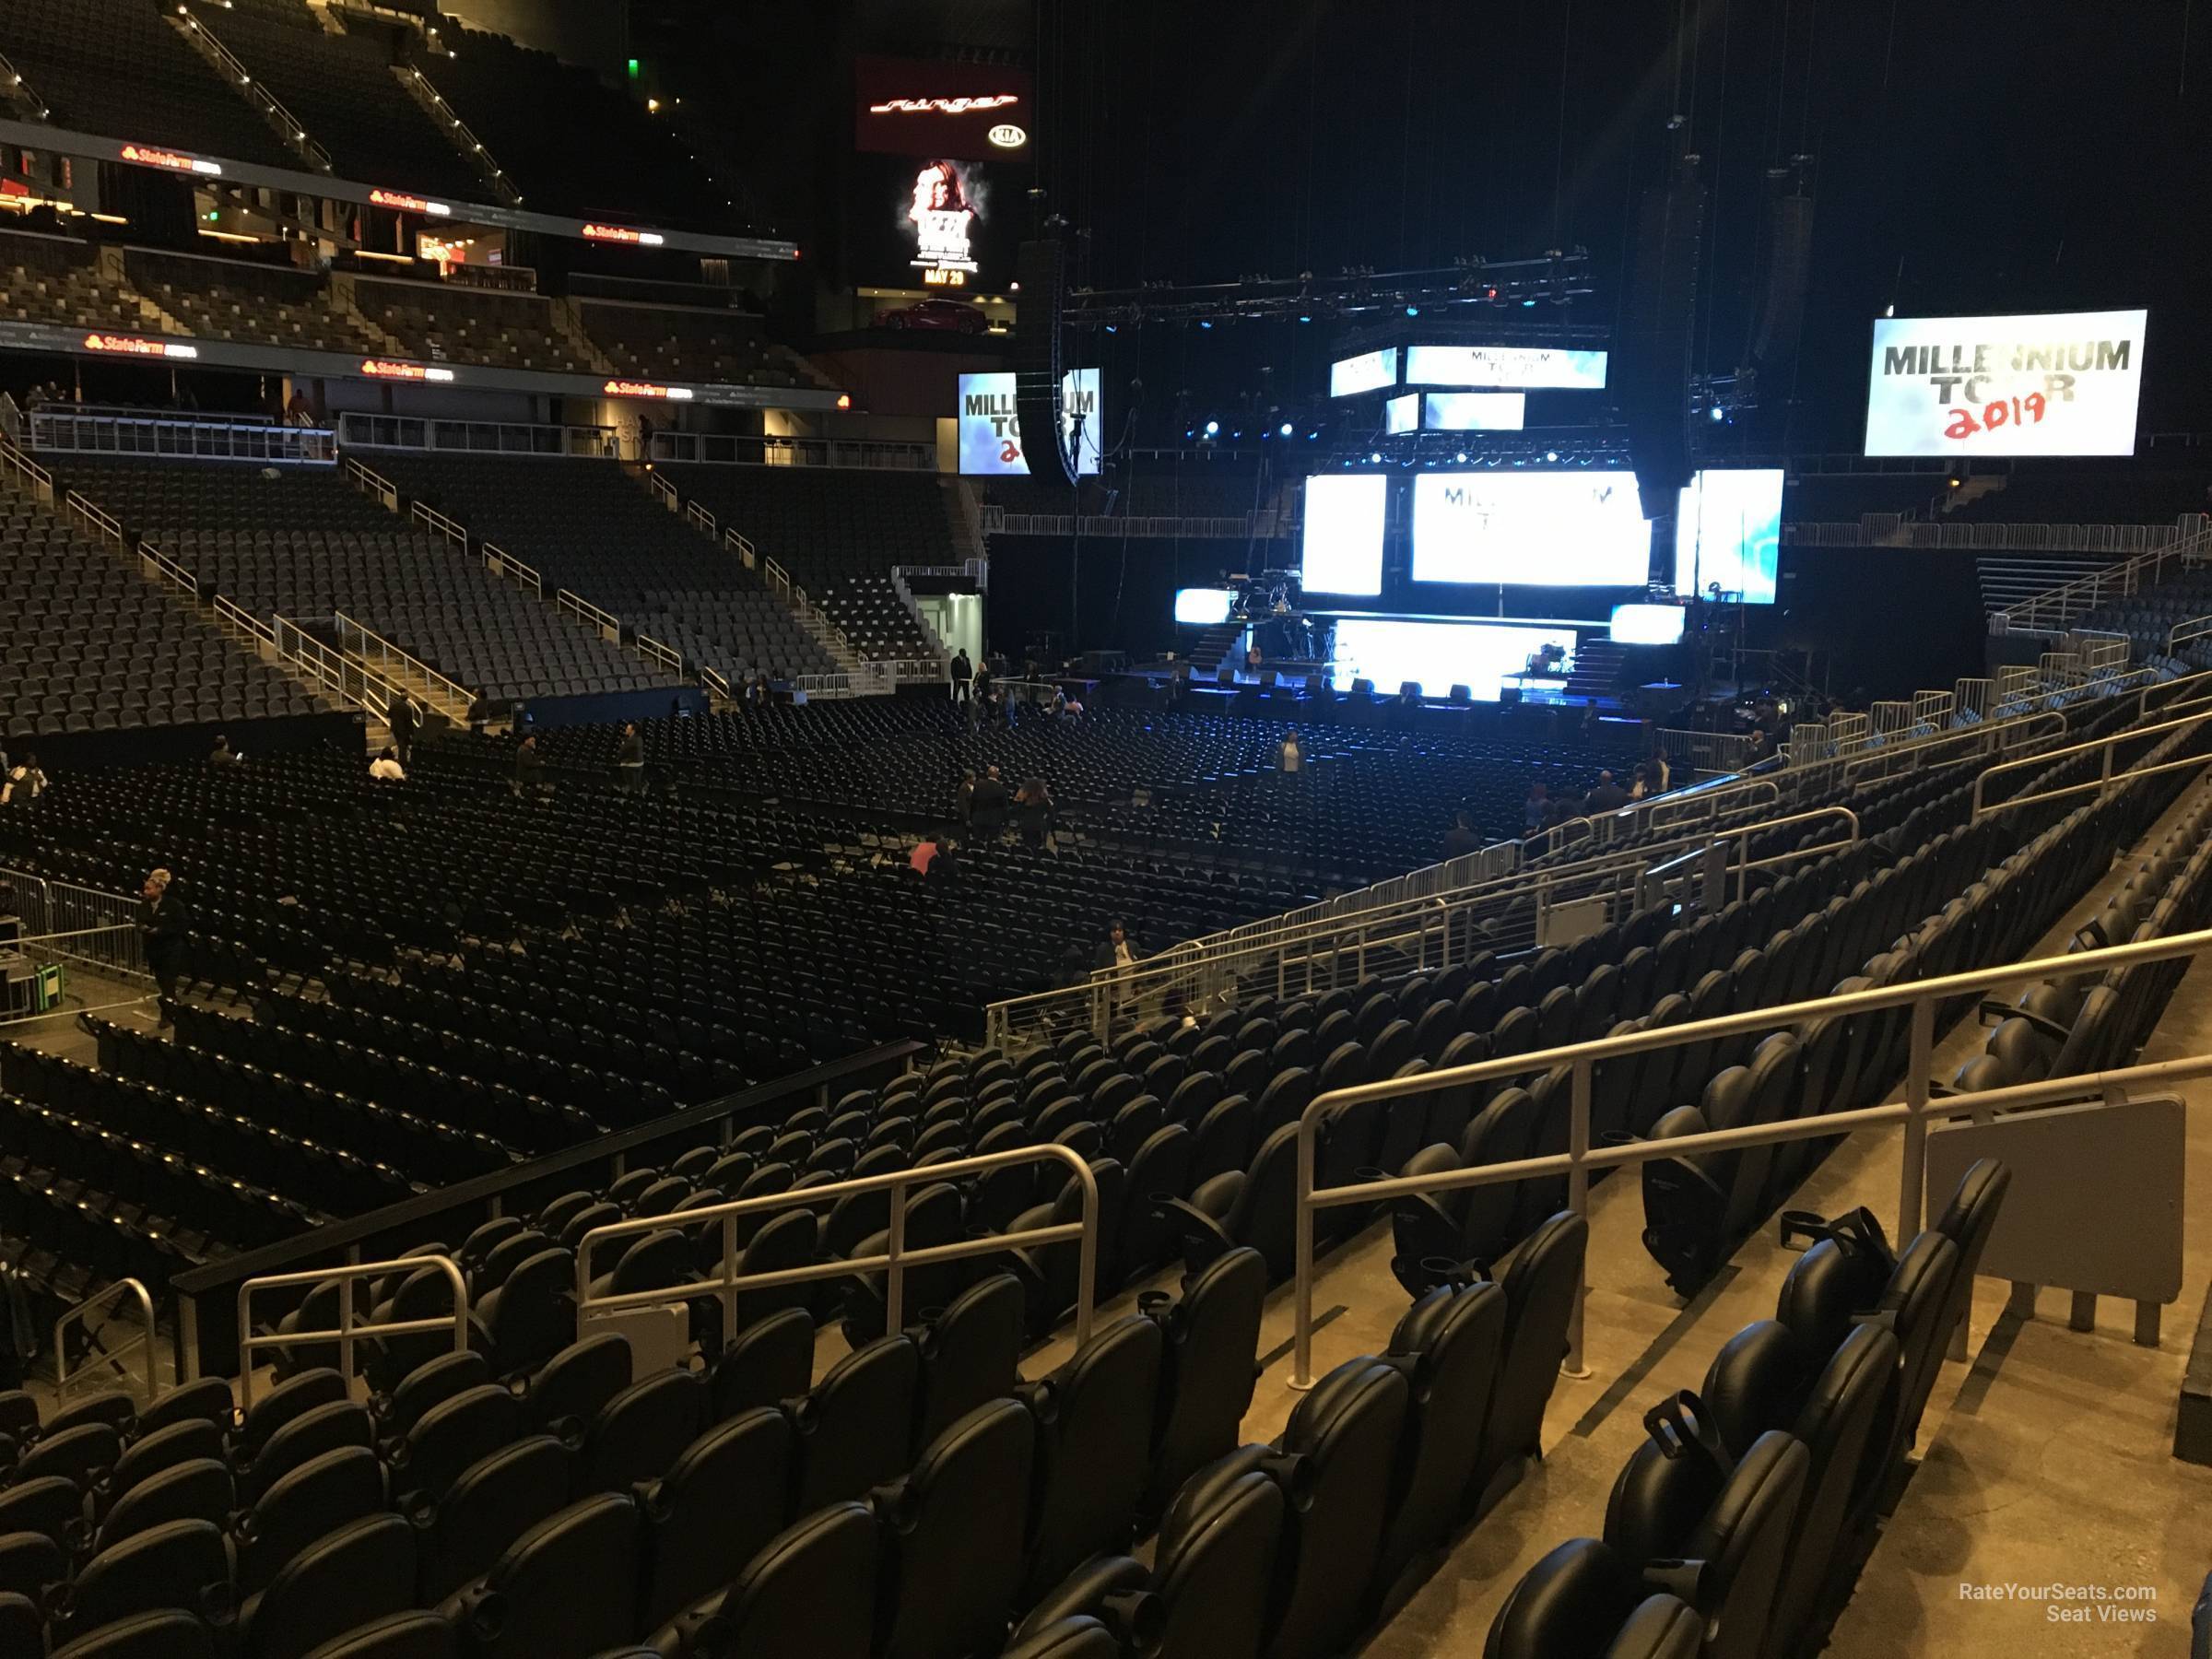 State Farm Arena Section 110 Concert Seating - RateYourSeats.com2400 x 1800